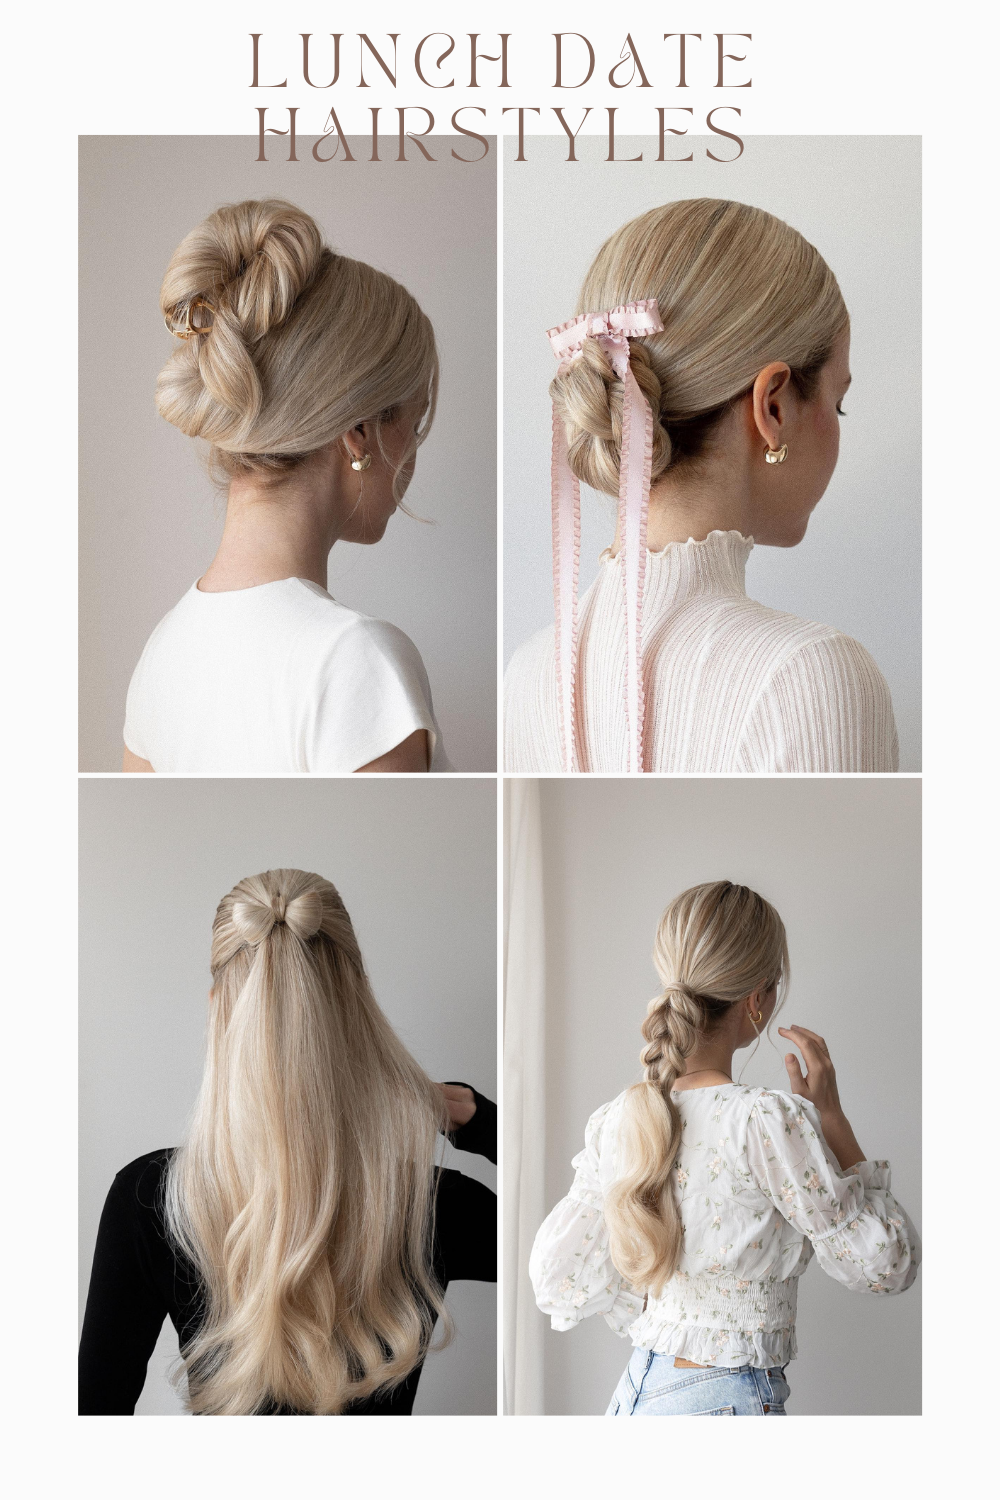 Lunch Date Hairstyle Ideas